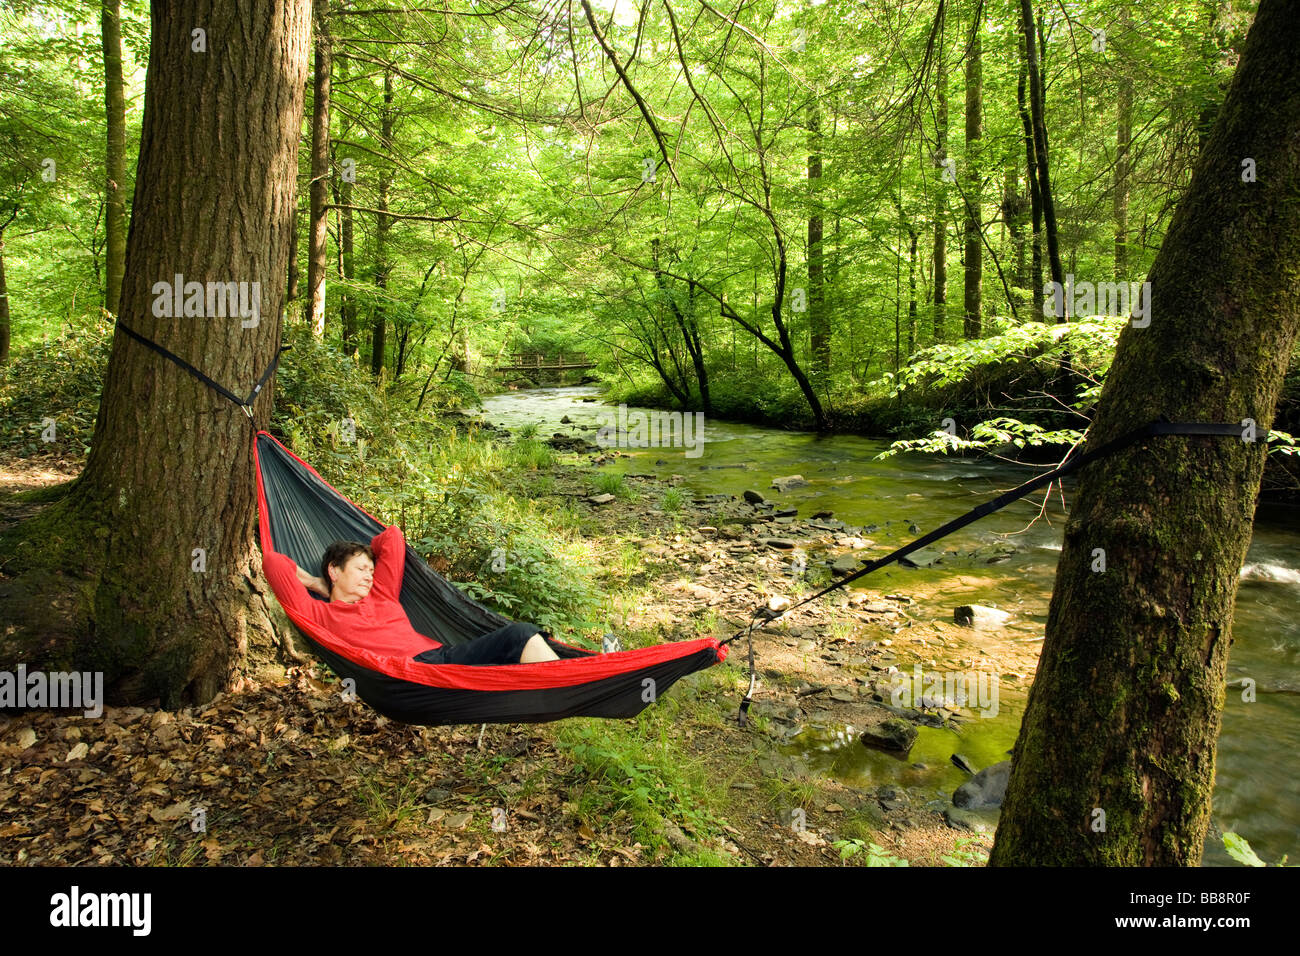 Donna relax in amaca dal fiume - Pisgah National Forest - Brevard, Carolina del Nord Foto Stock